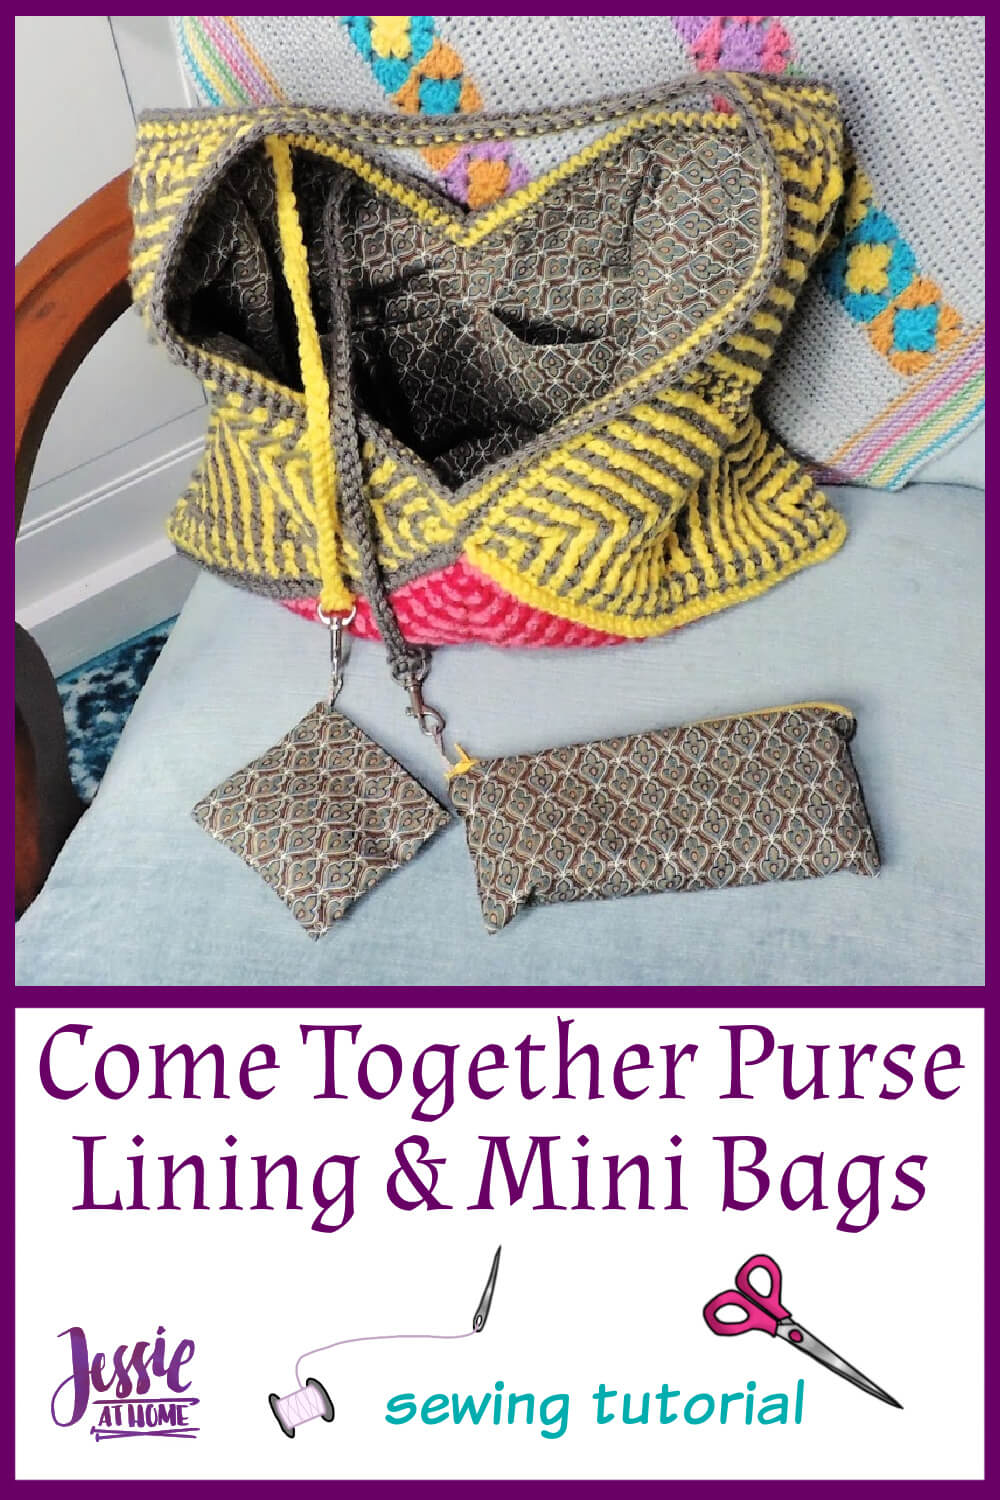 Come Together Purse Lining Sewing Tutorial - with 2 mini bags!